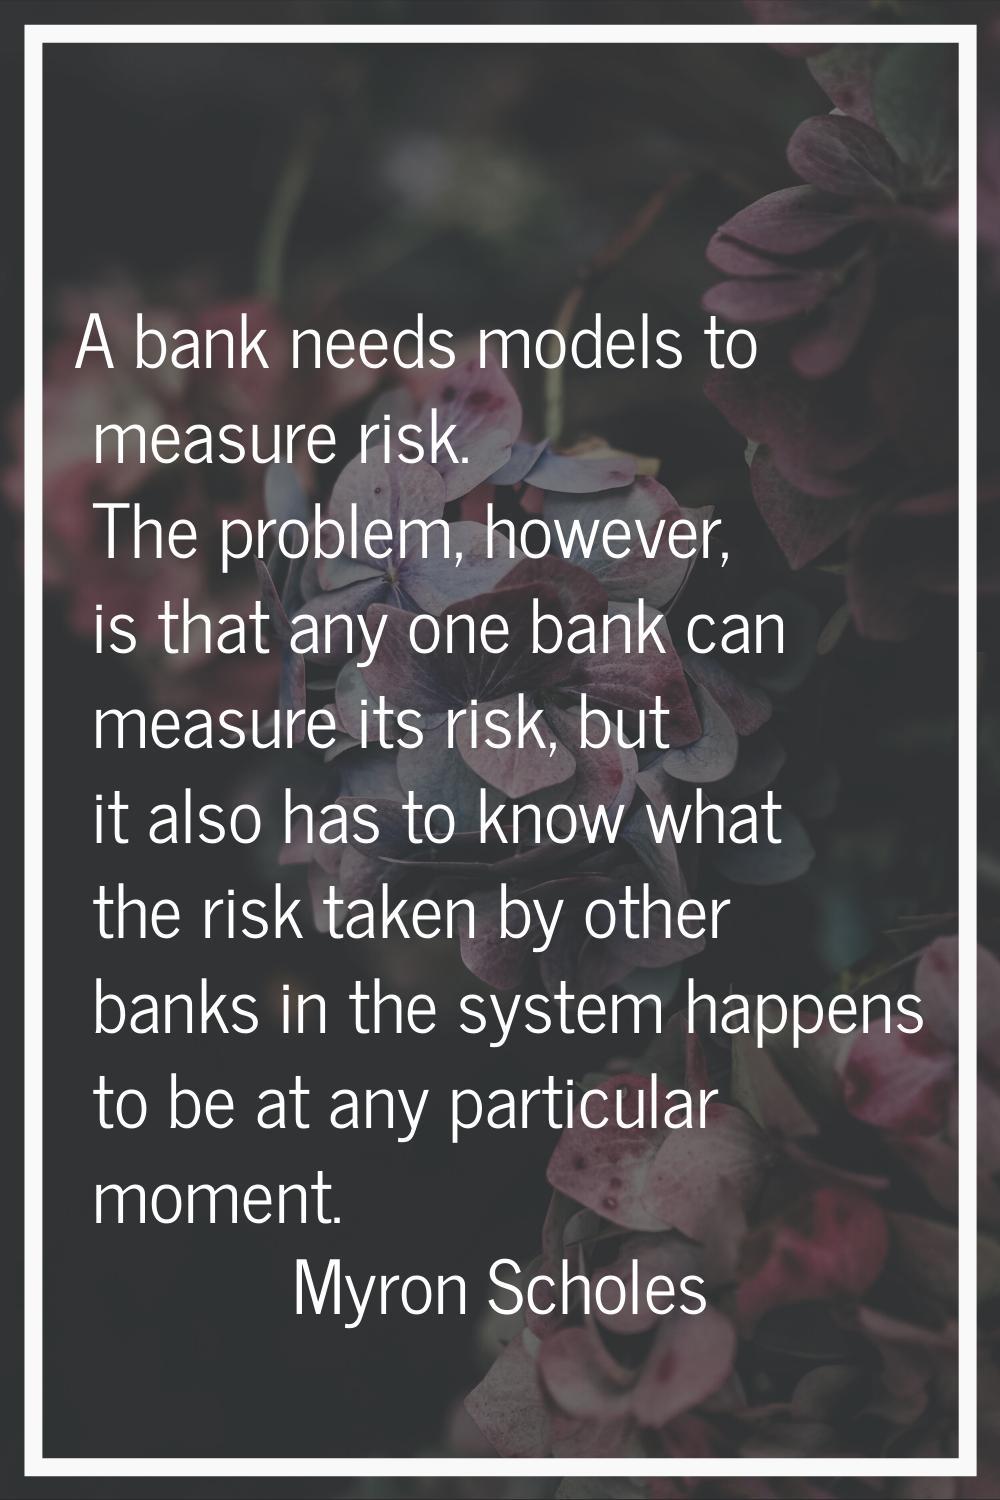 A bank needs models to measure risk. The problem, however, is that any one bank can measure its ris